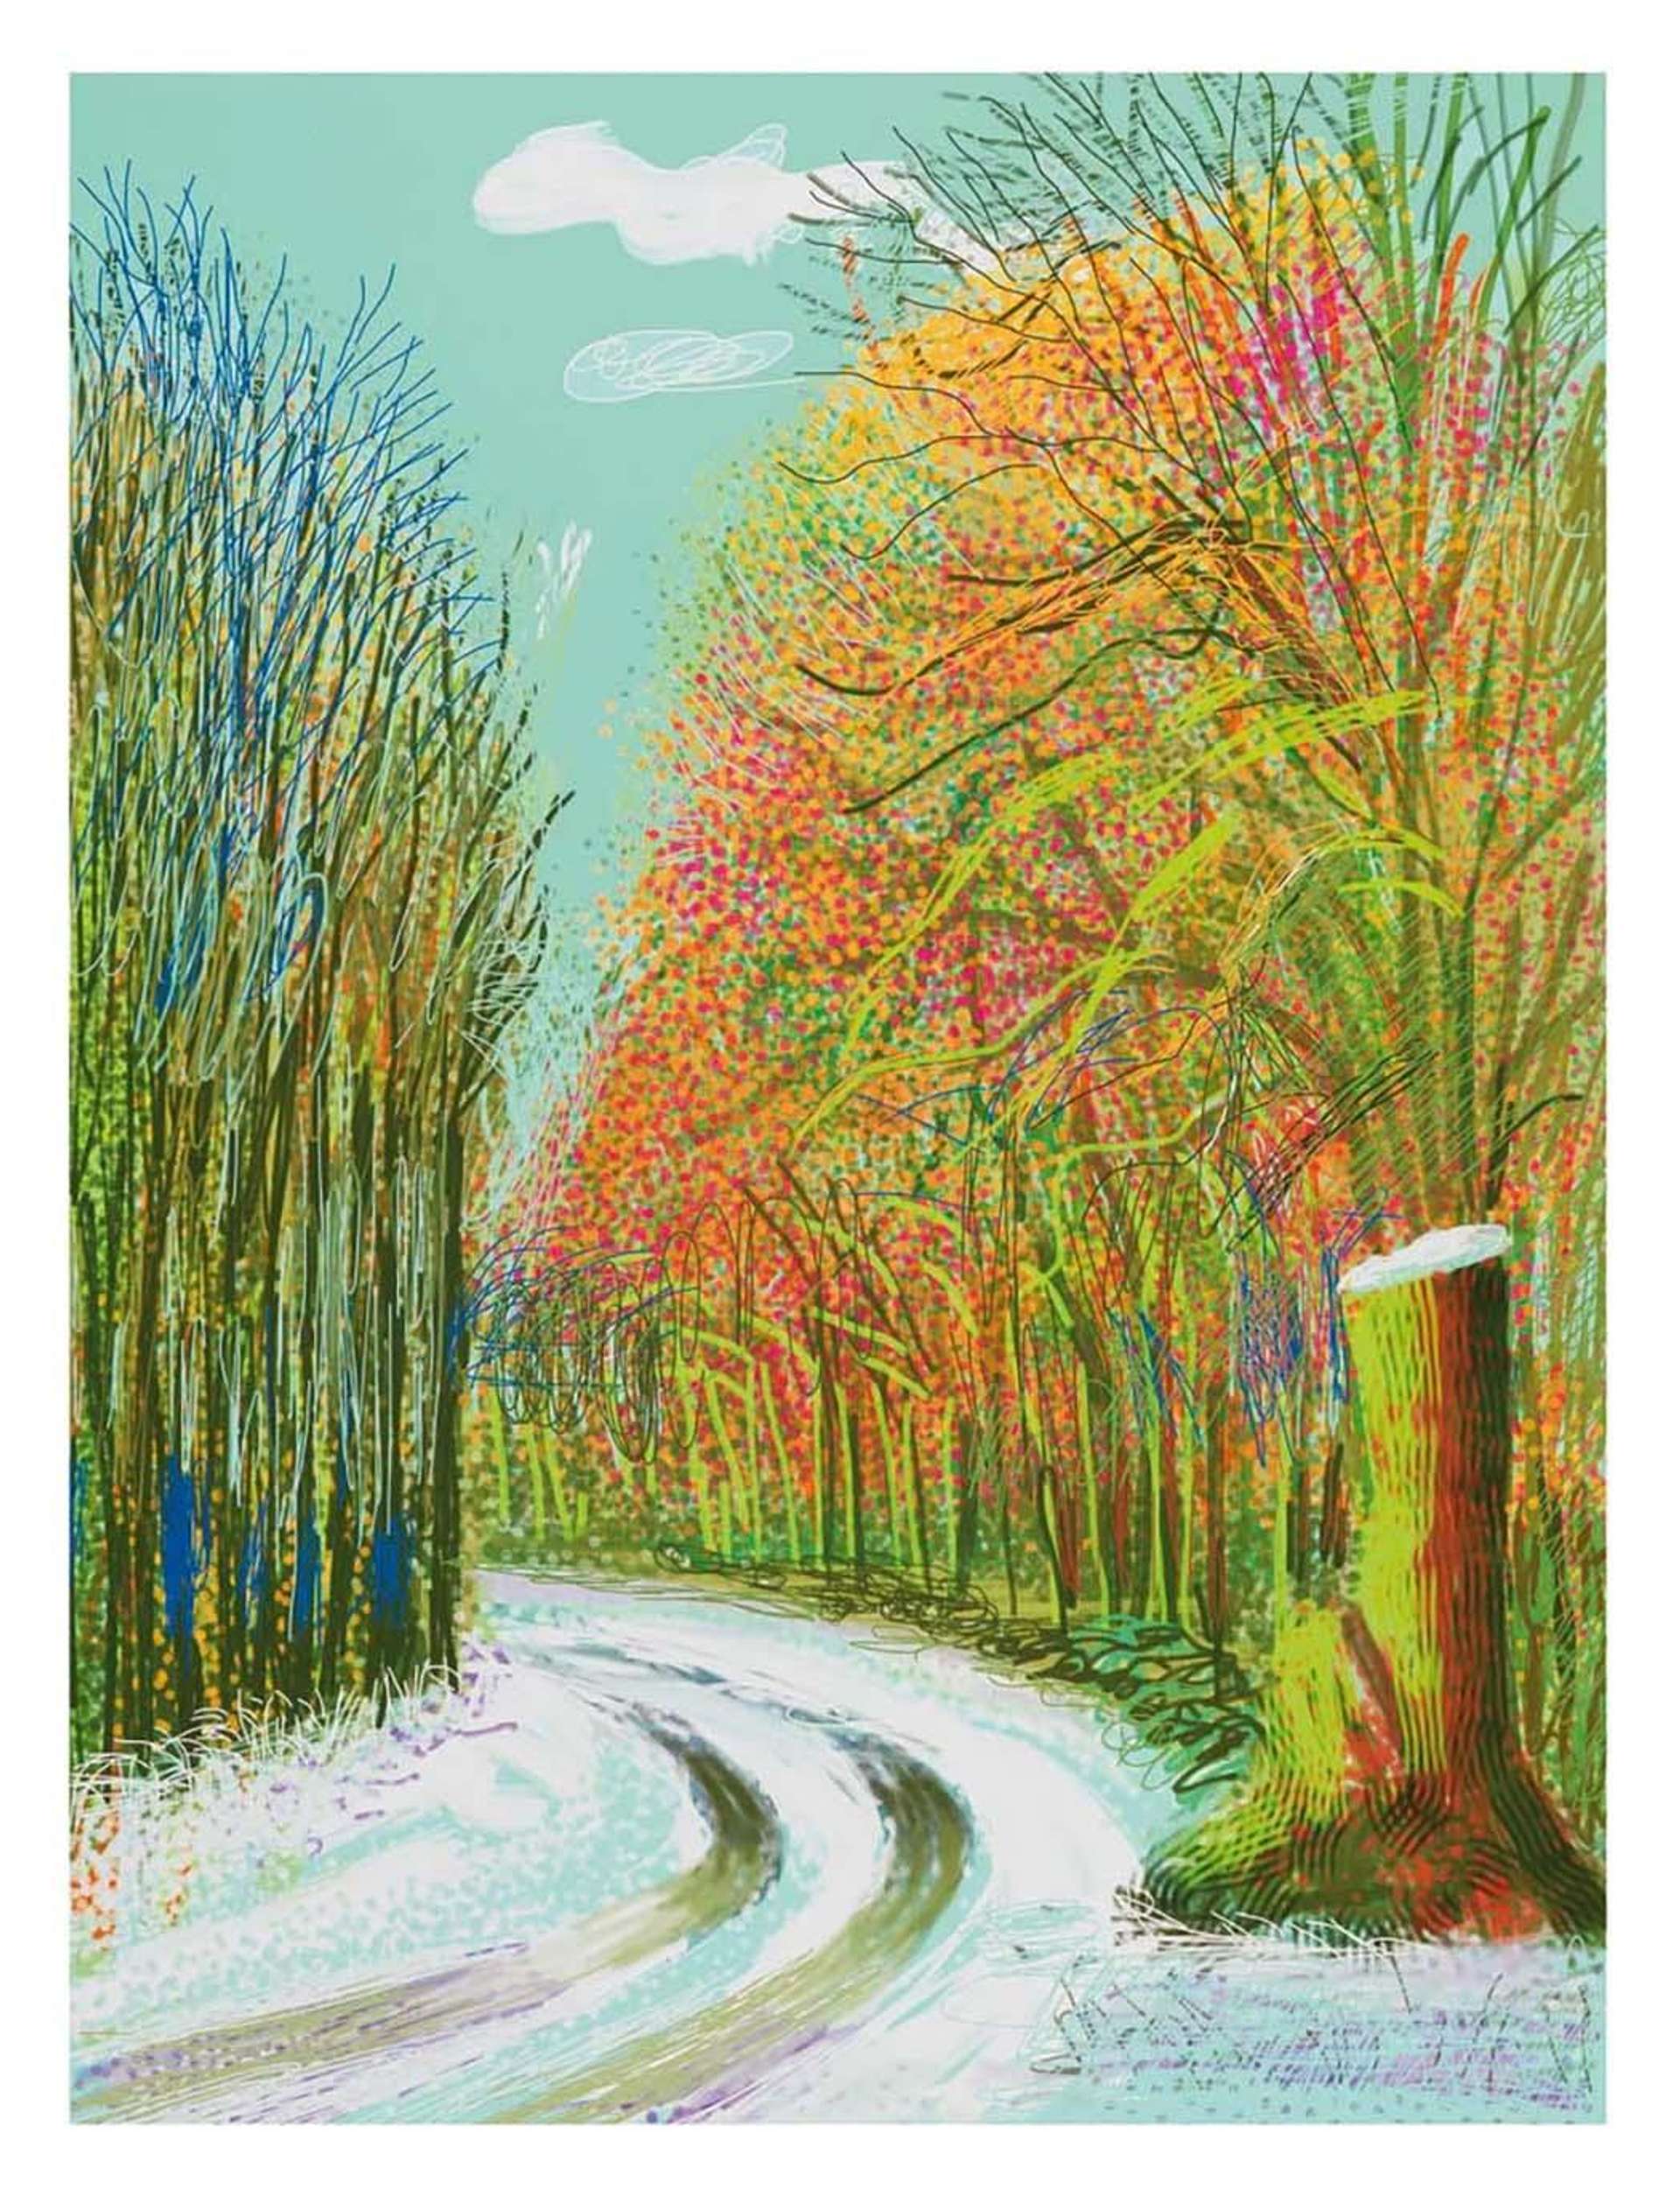 The Arrival Of Spring In Woldgate East Yorkshire 8th January 2011 - Signed Print by David Hockney 2011 - MyArtBroker